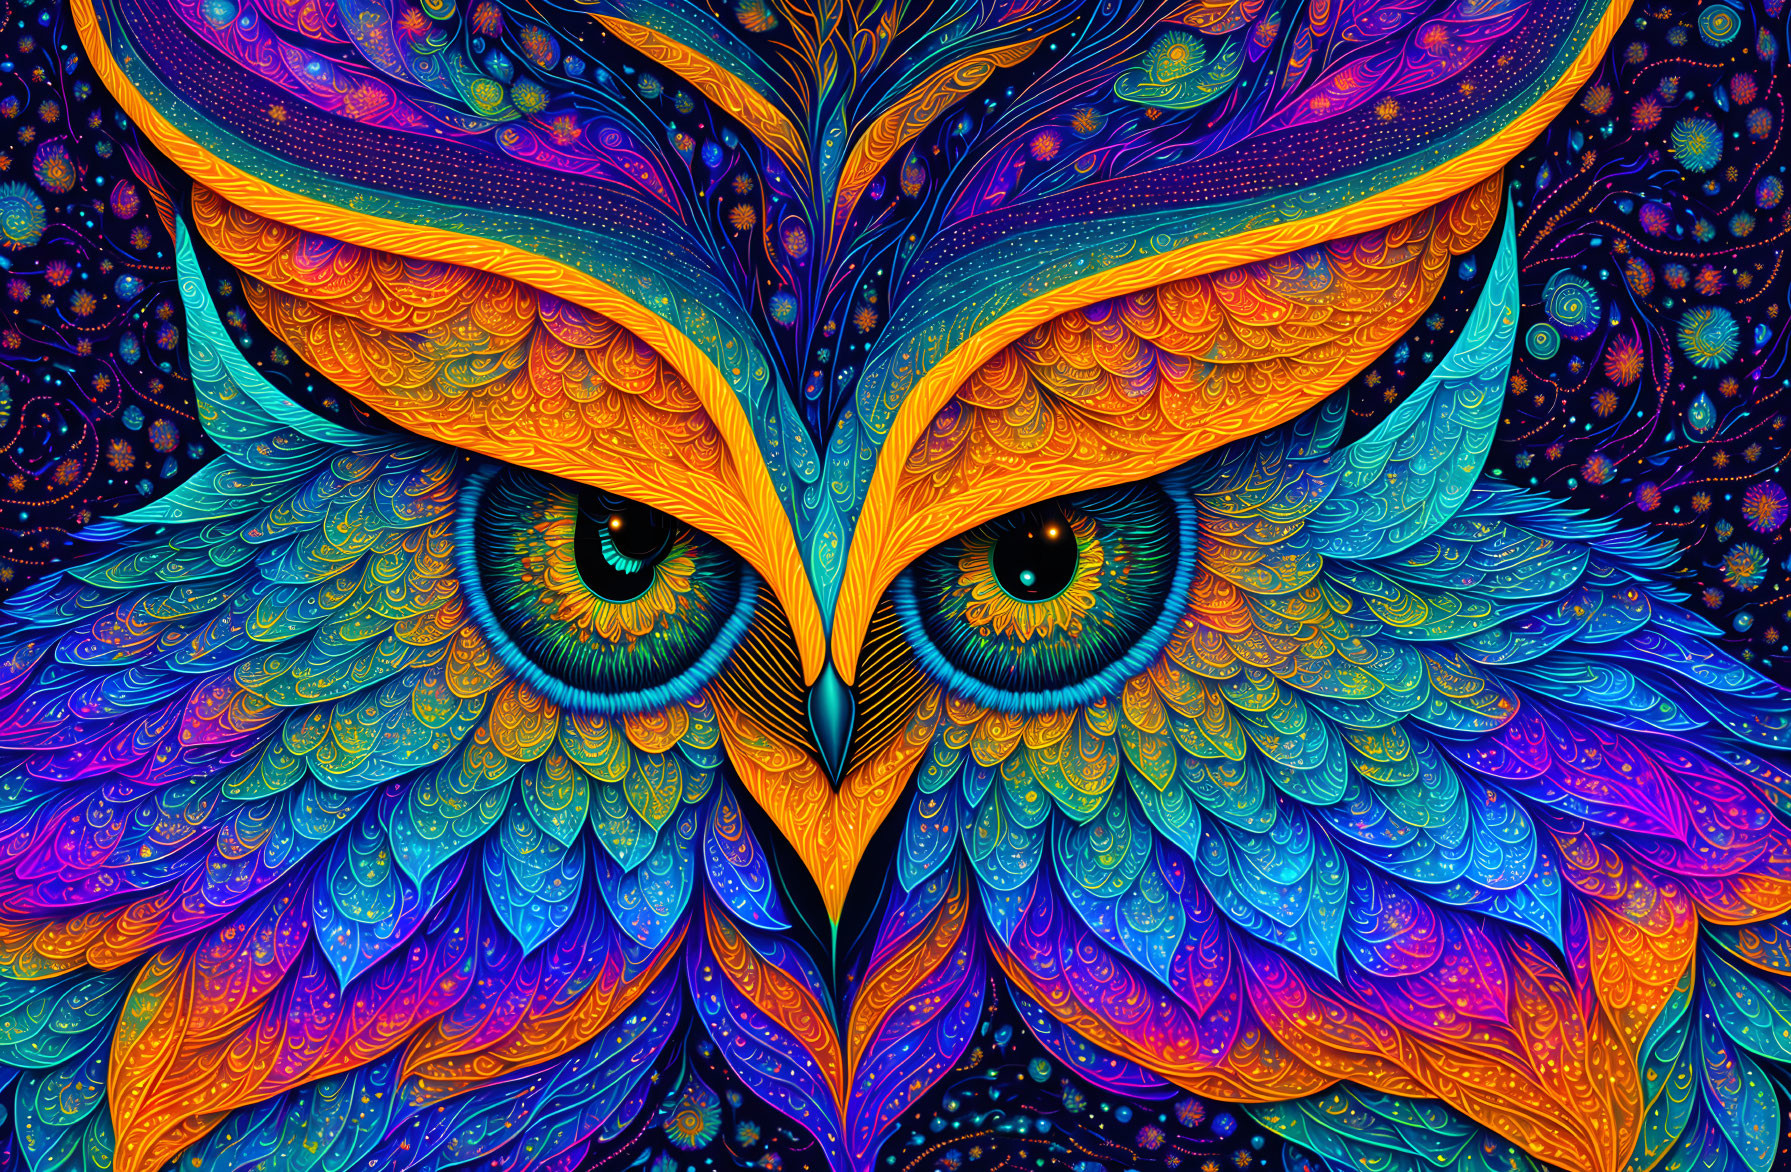 Colorful Psychedelic Owl Illustration with Detailed Patterns and Rich Palette